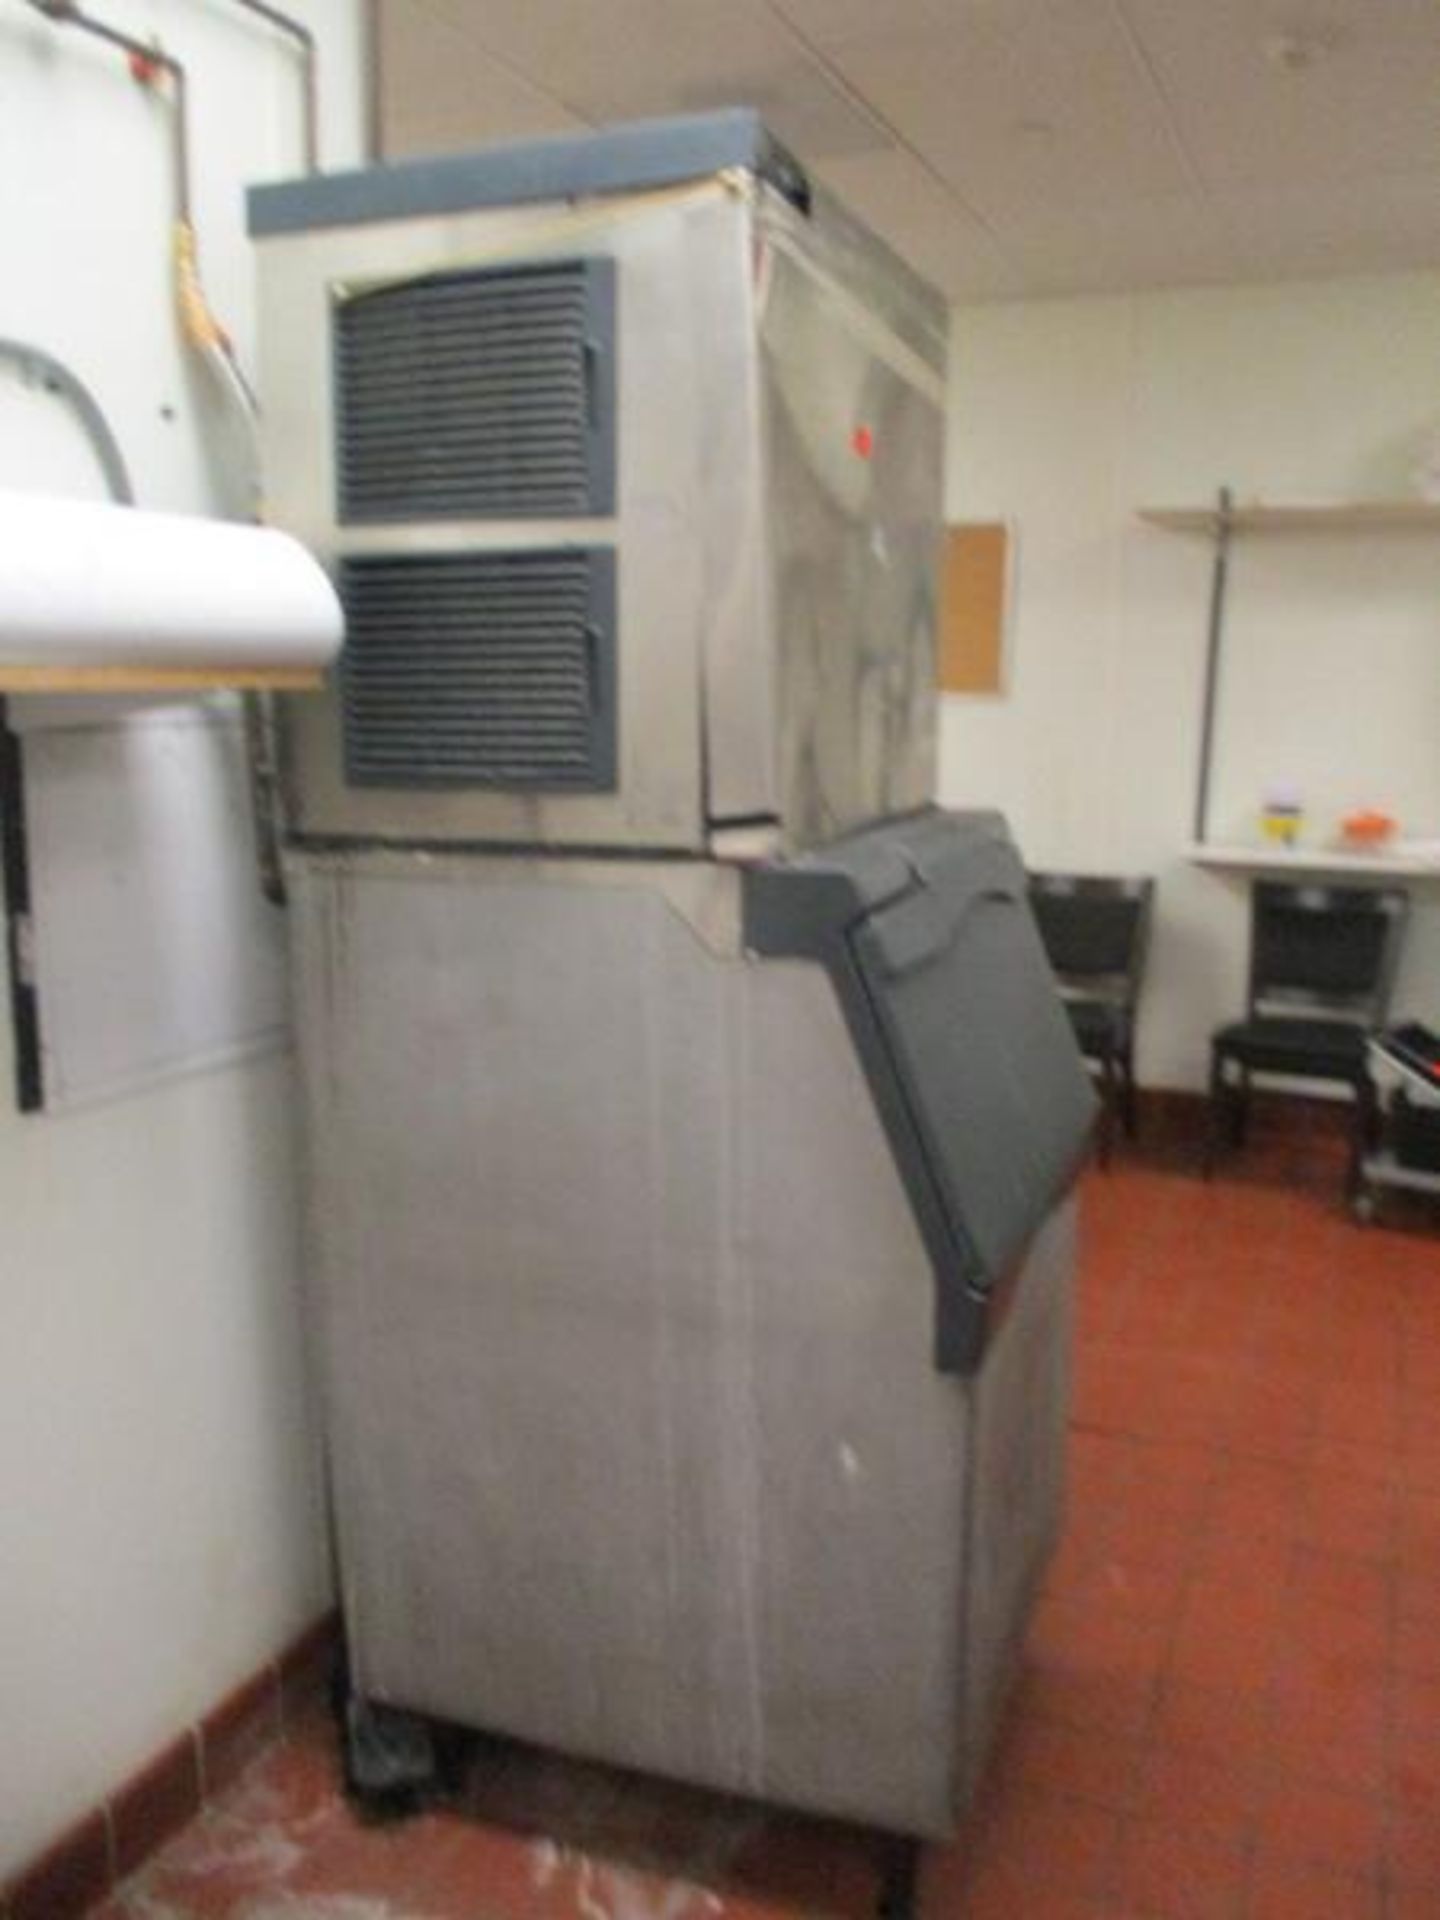 Ice Machine, Scotsman Prodigy, Model: C10305A-32B, SN: 09091320011372 - Has Damage To Right Top - Image 6 of 6